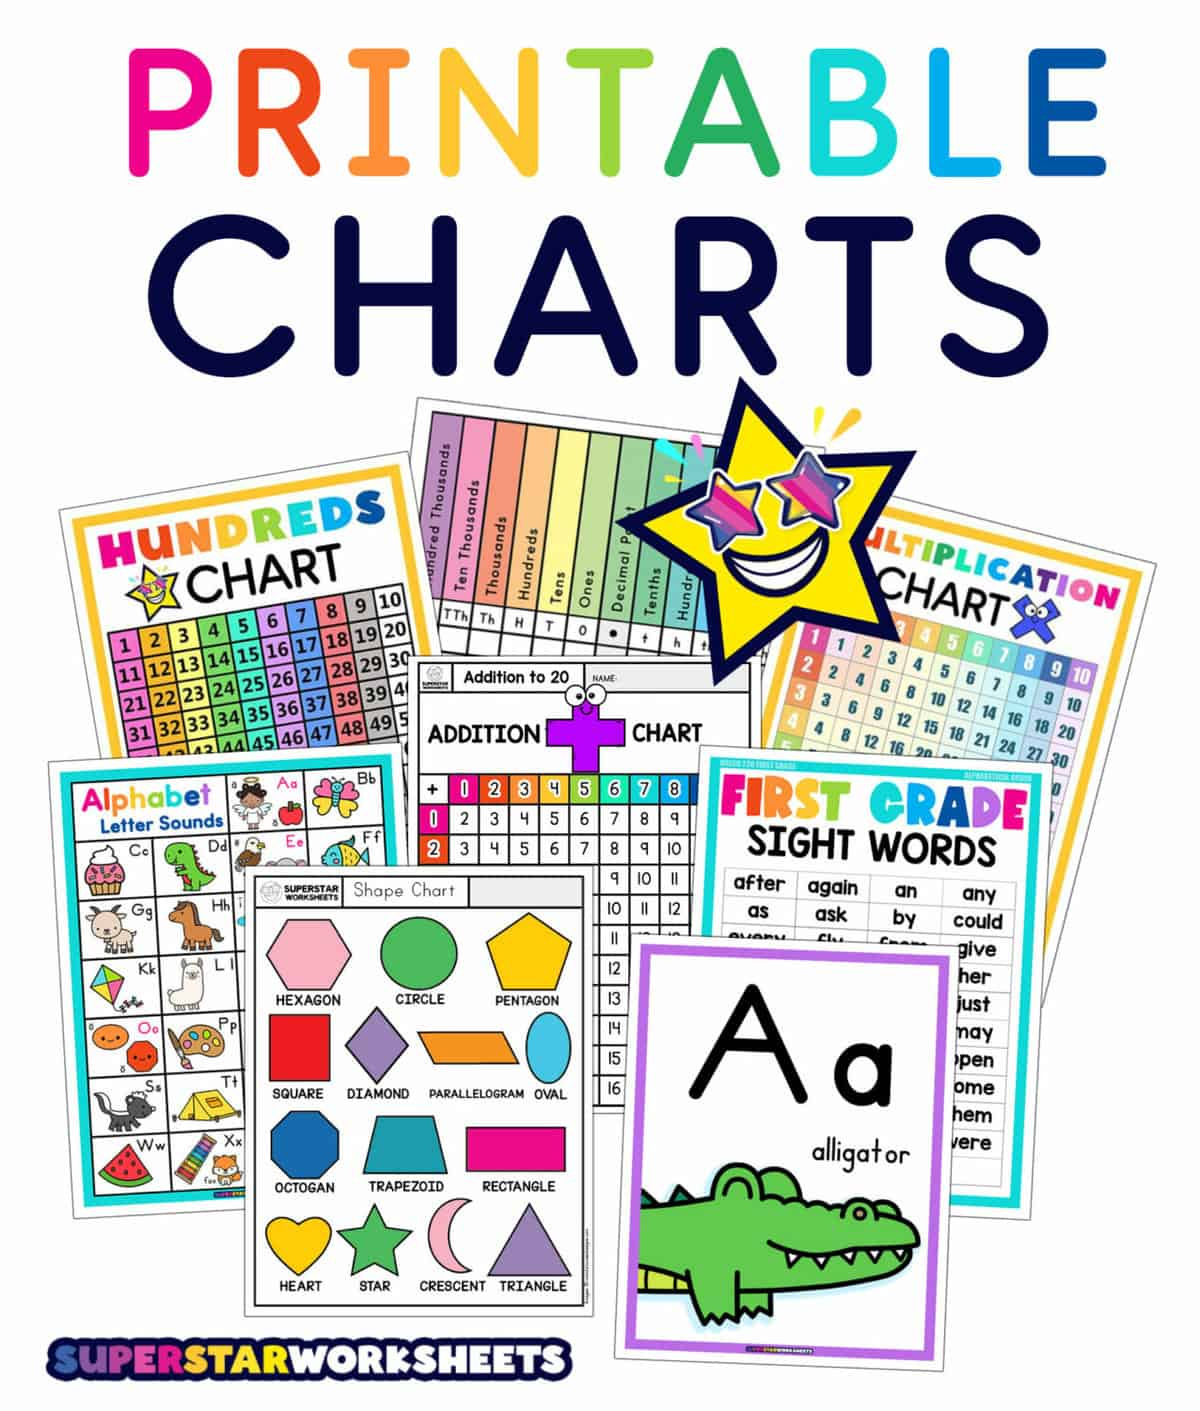 Printable Charts - Superstar Worksheets with Charts Free Printable